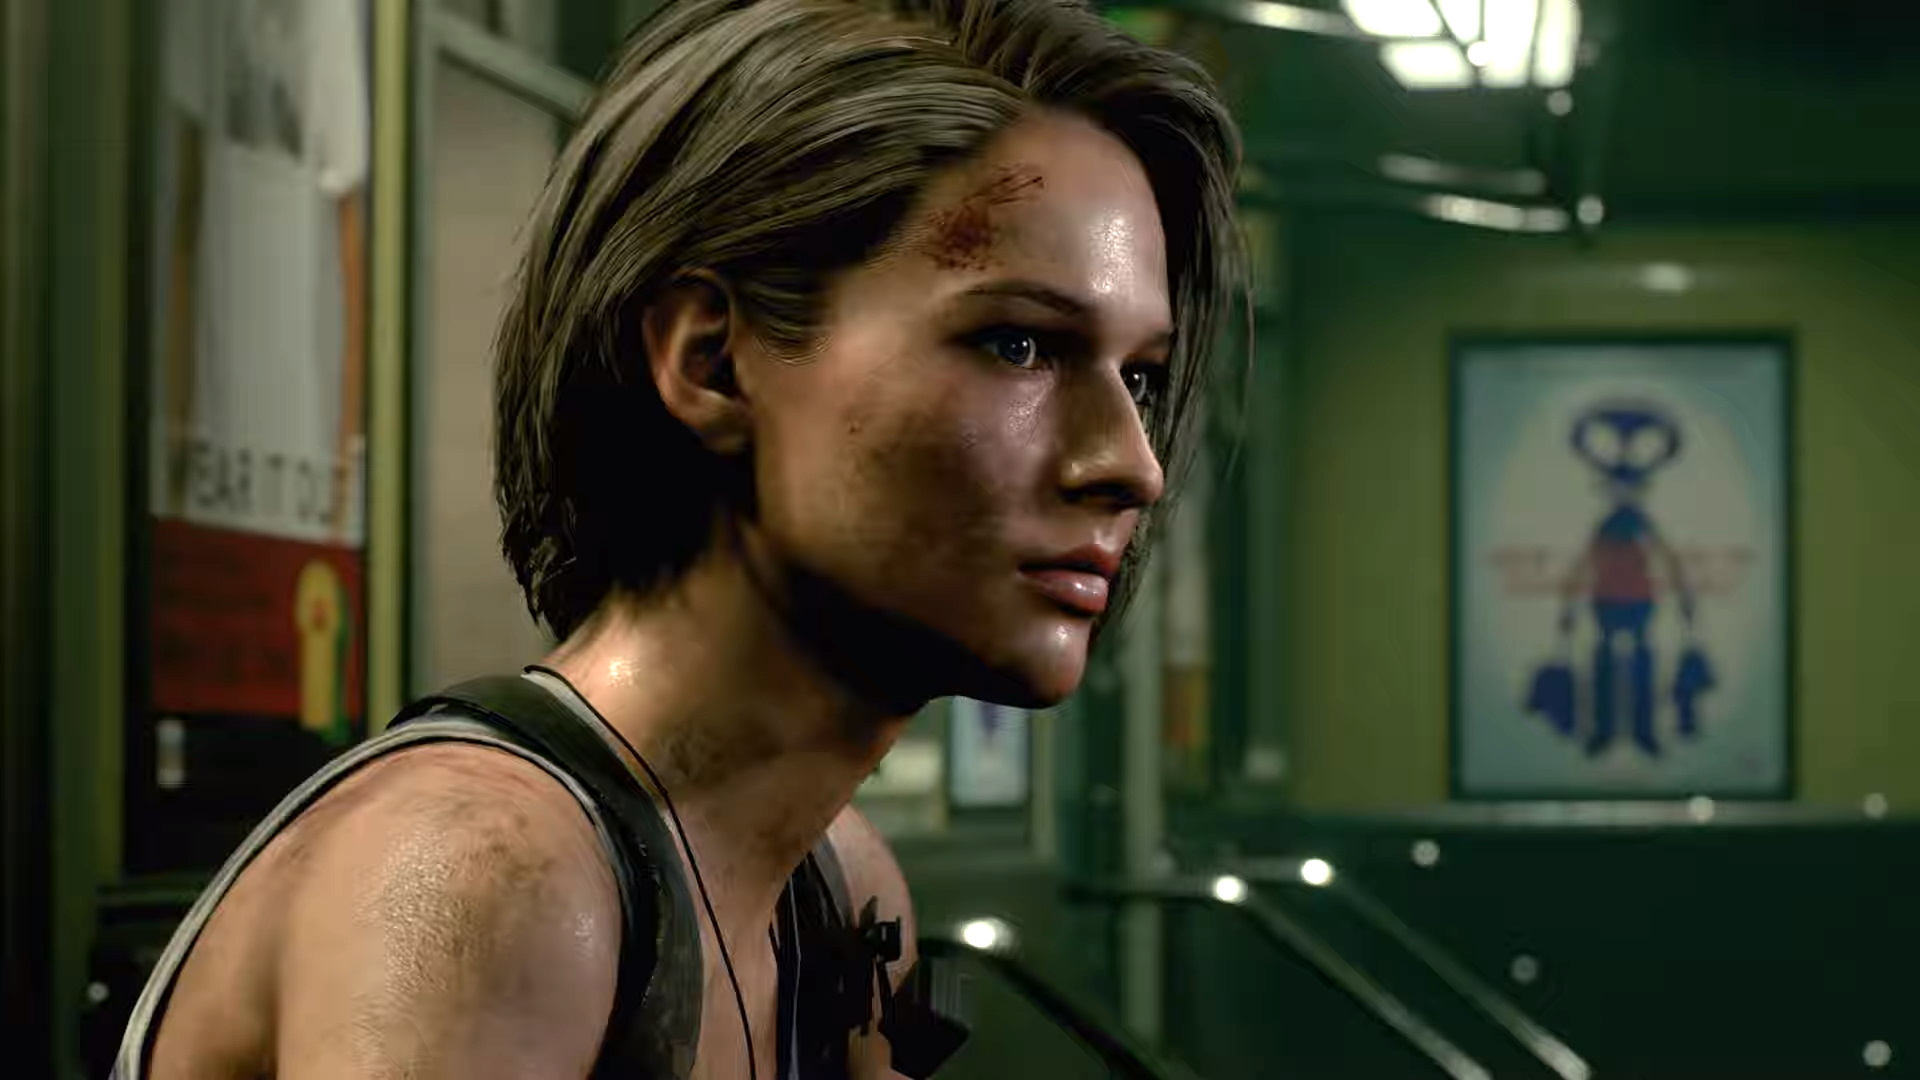  Fans wanting to play Jill in Resident Evil again will have to settle with the Death Island movie for now 